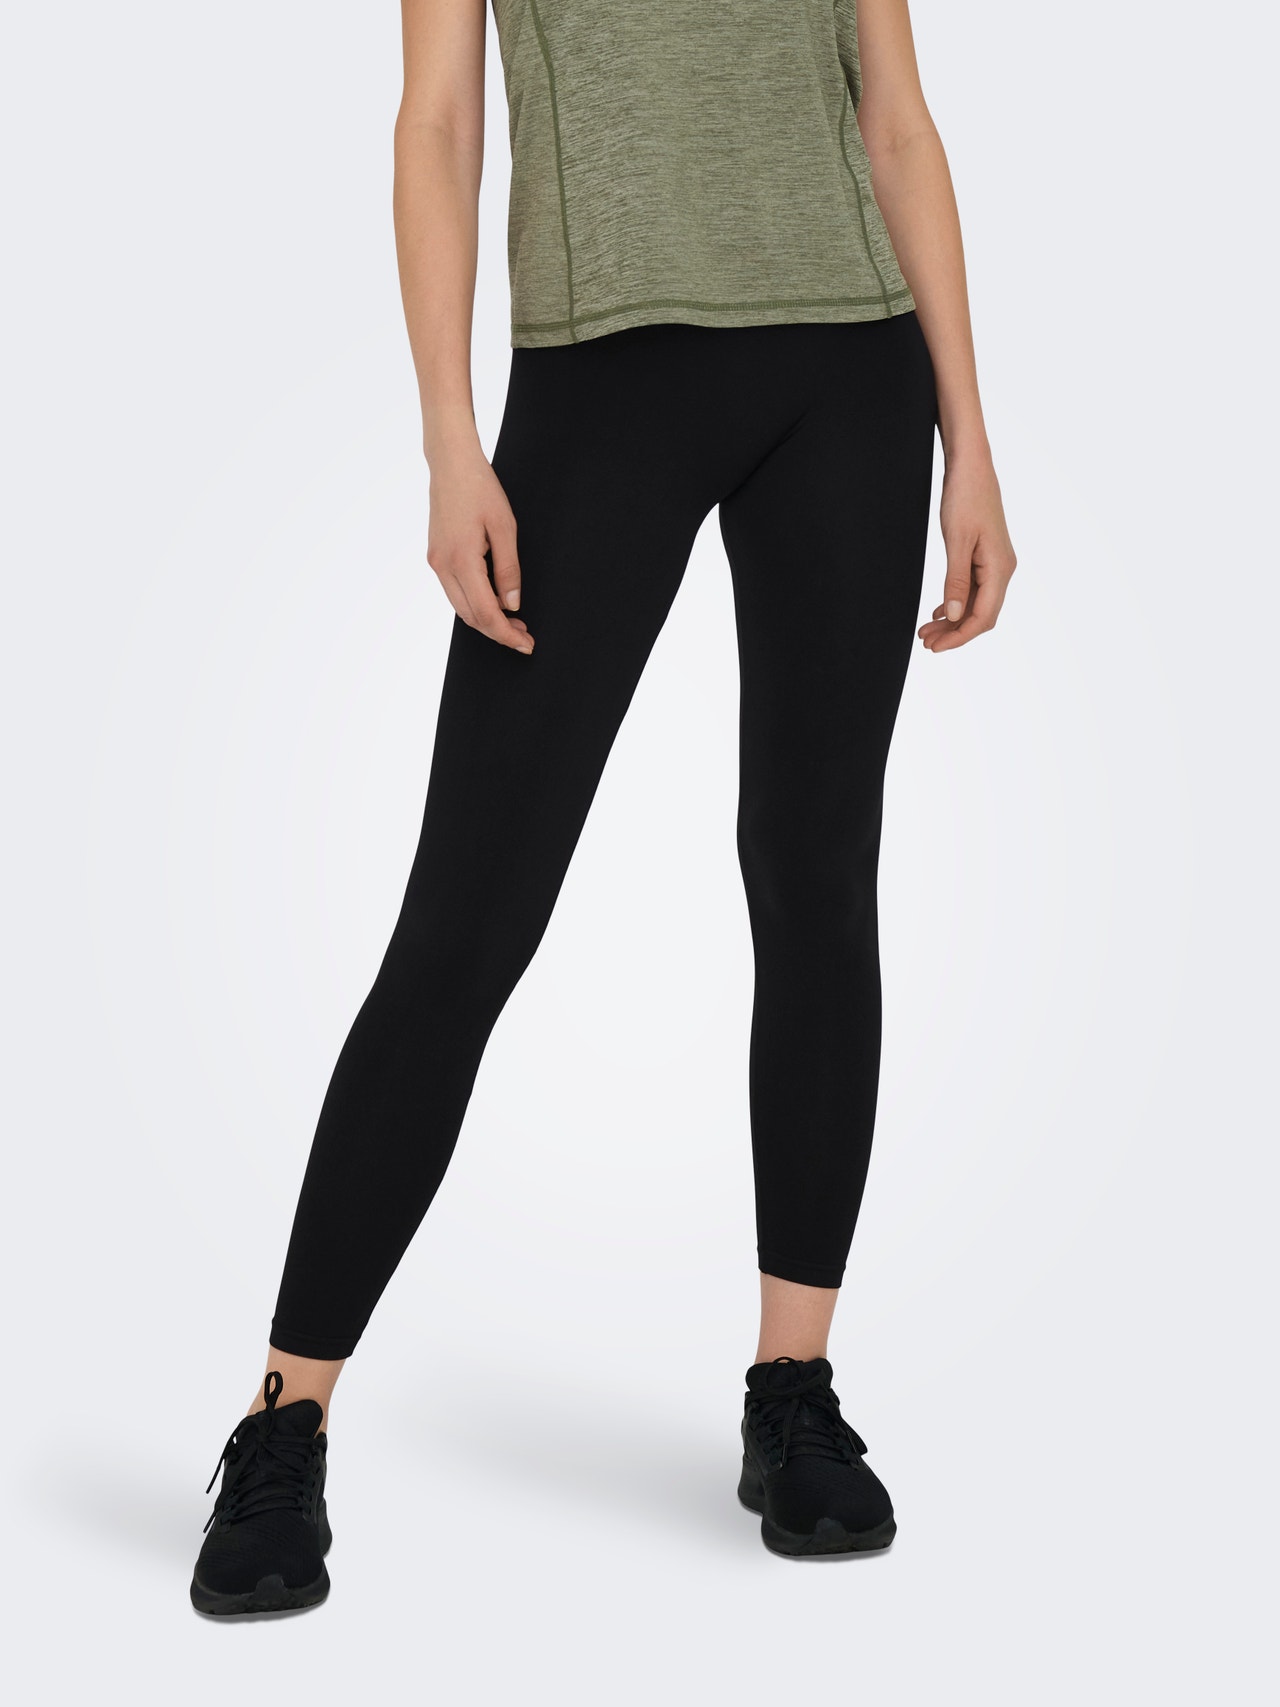 ONLY Tight Fit High waist Leggings -Black - 15296630